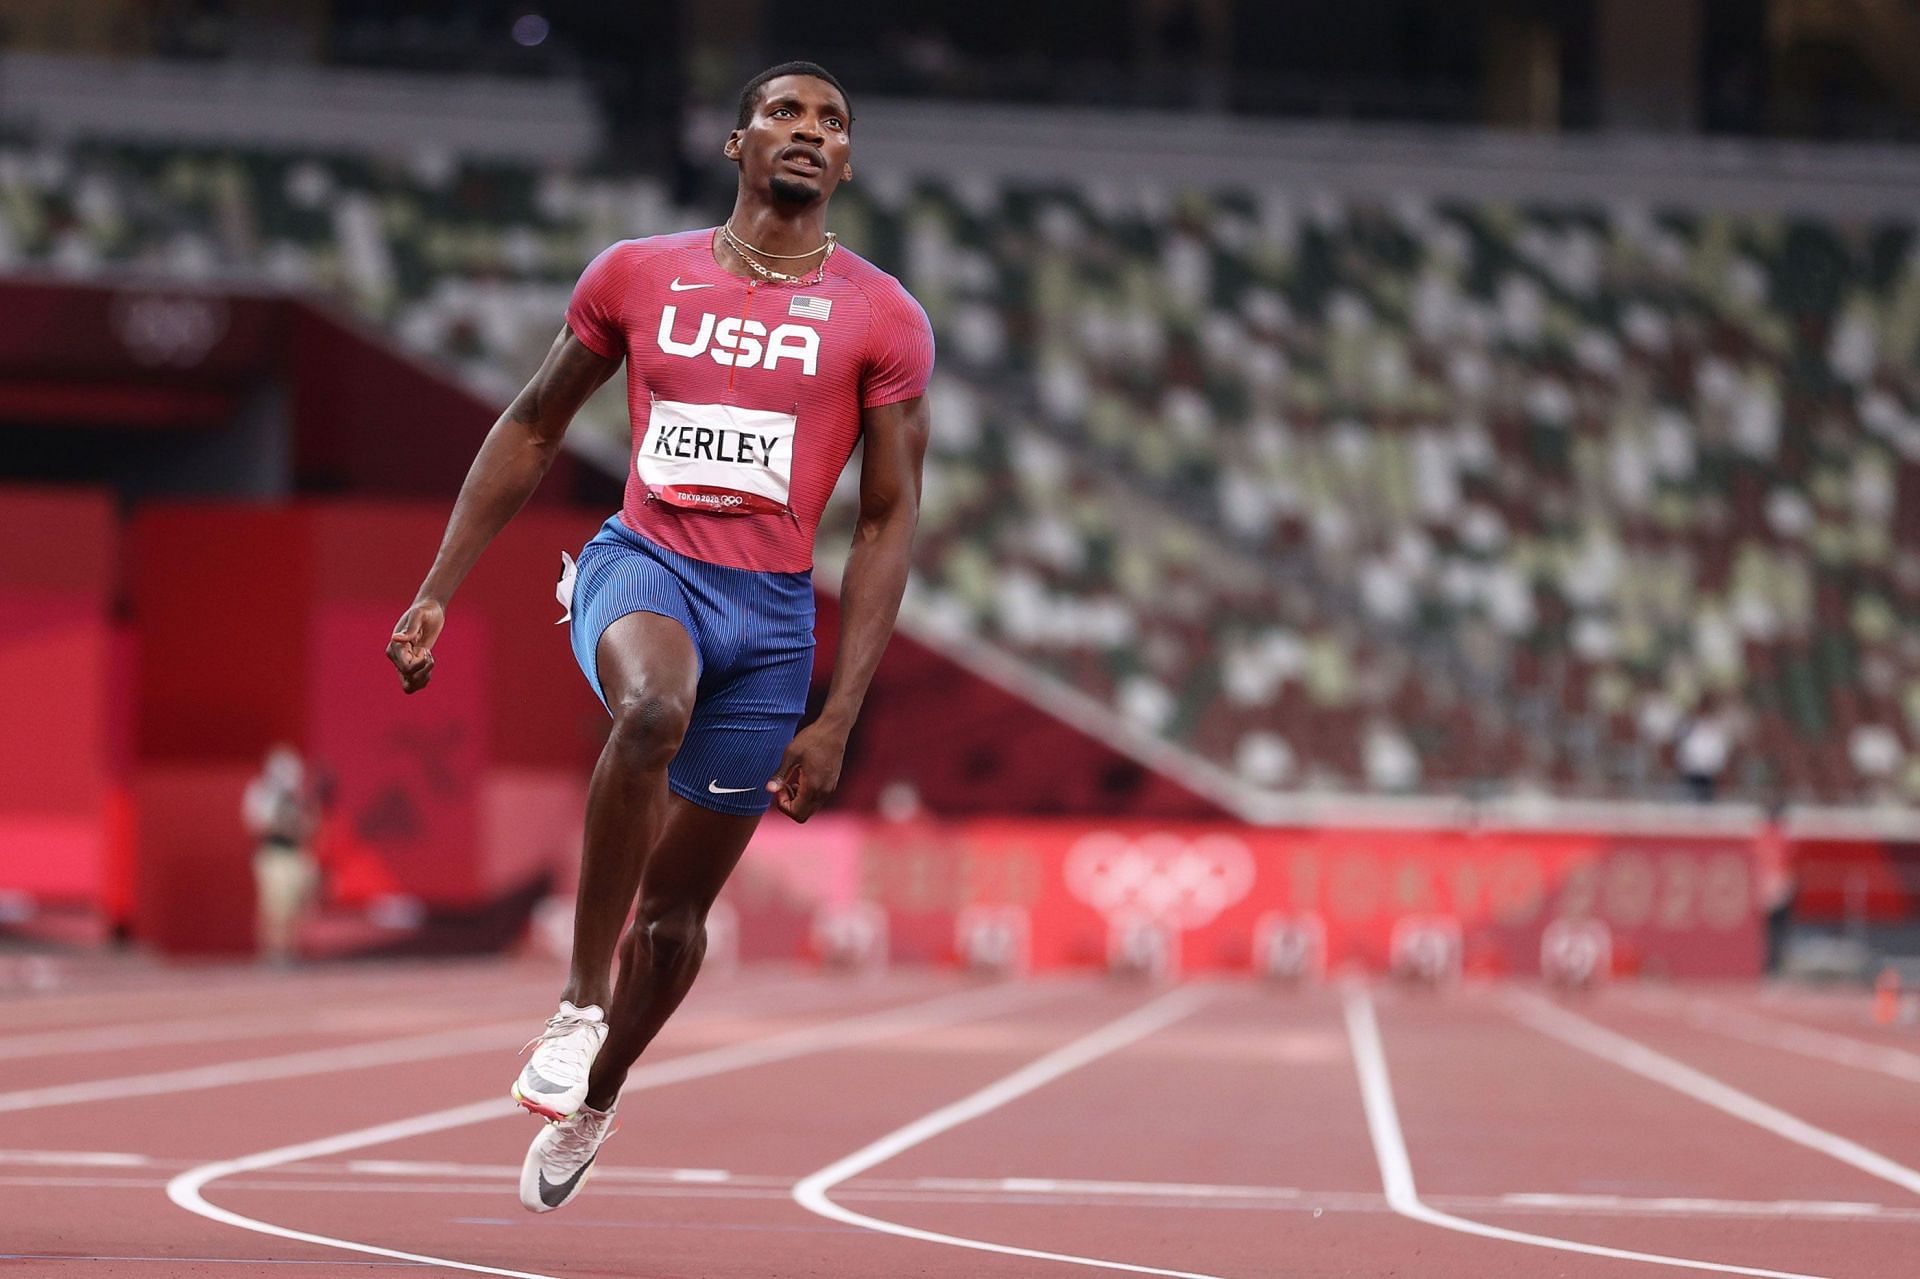 Fred Kerley recorded the fastest 100-metre heat time at the World Athletics Championships 2022 (Image via Getty Images)